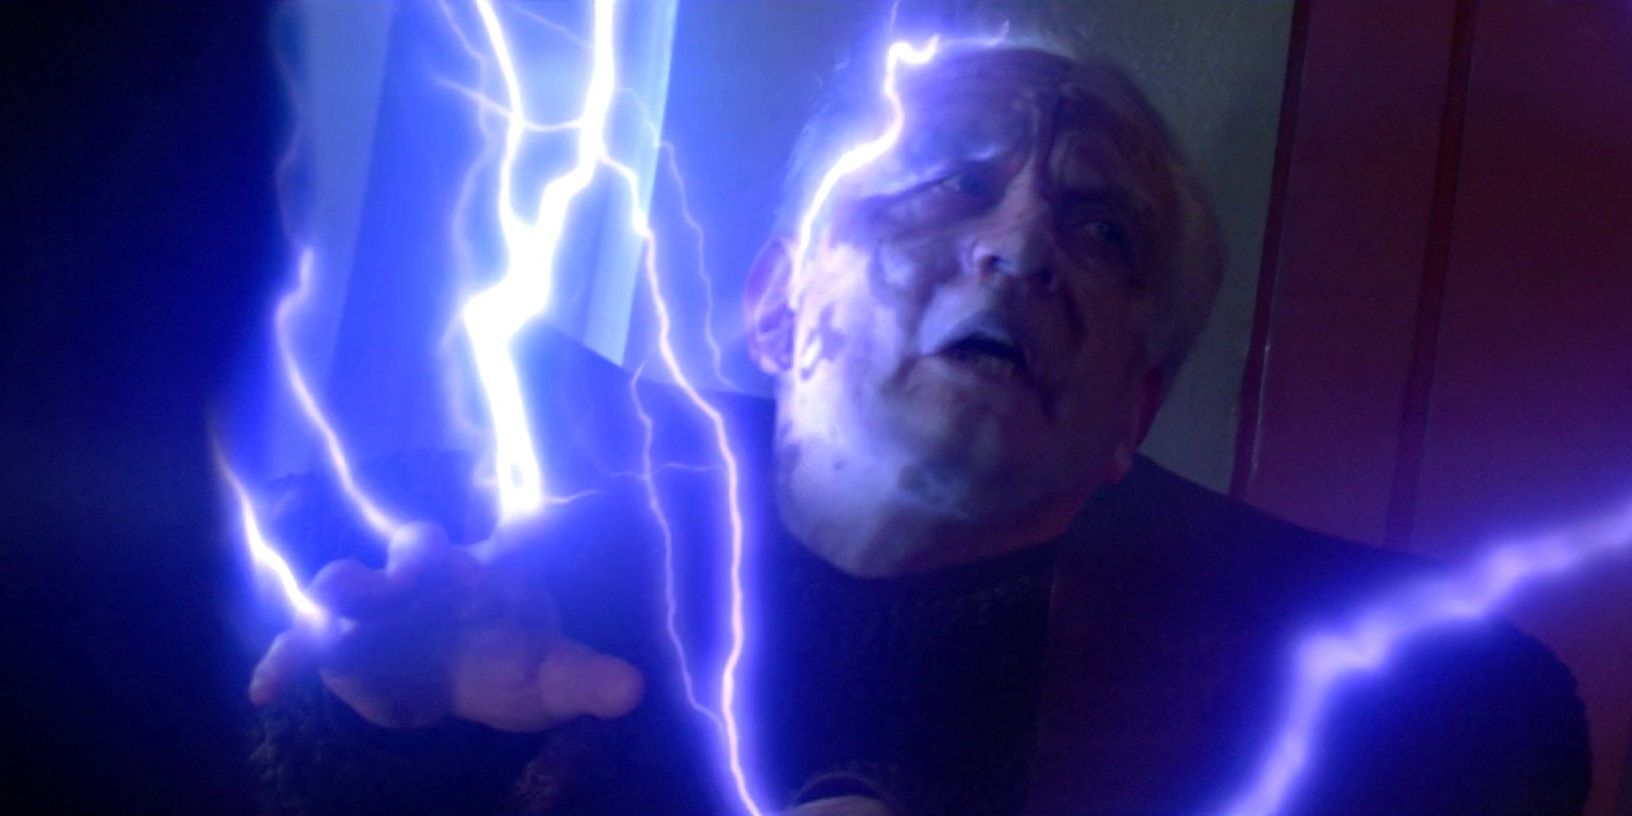 Palpatine's face deforming in Star Wars Revenge of the Sith